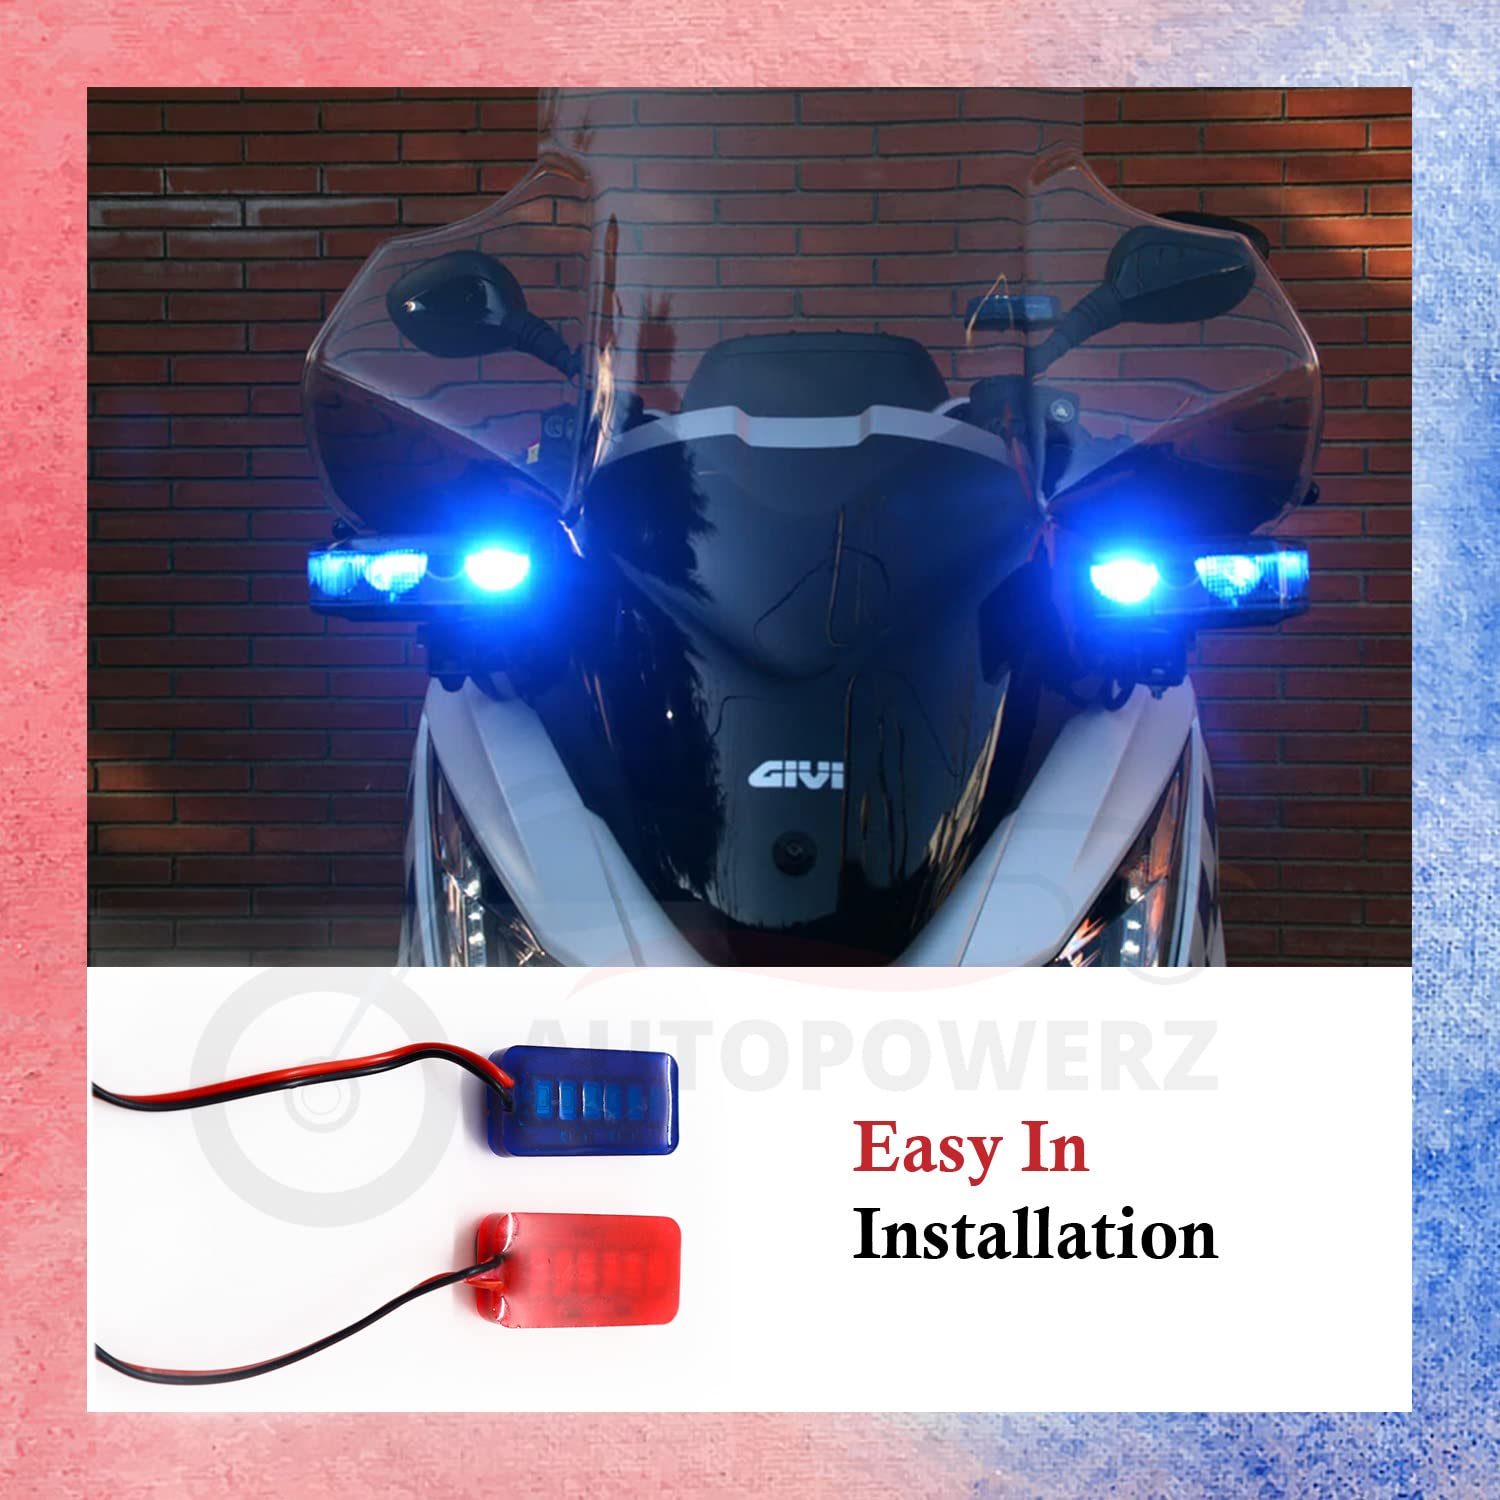 AUTOPOWERZ® LED Biscuit Shape Strobe Light with Flashing Handle Light Red & Blue Universal for Motorcycle